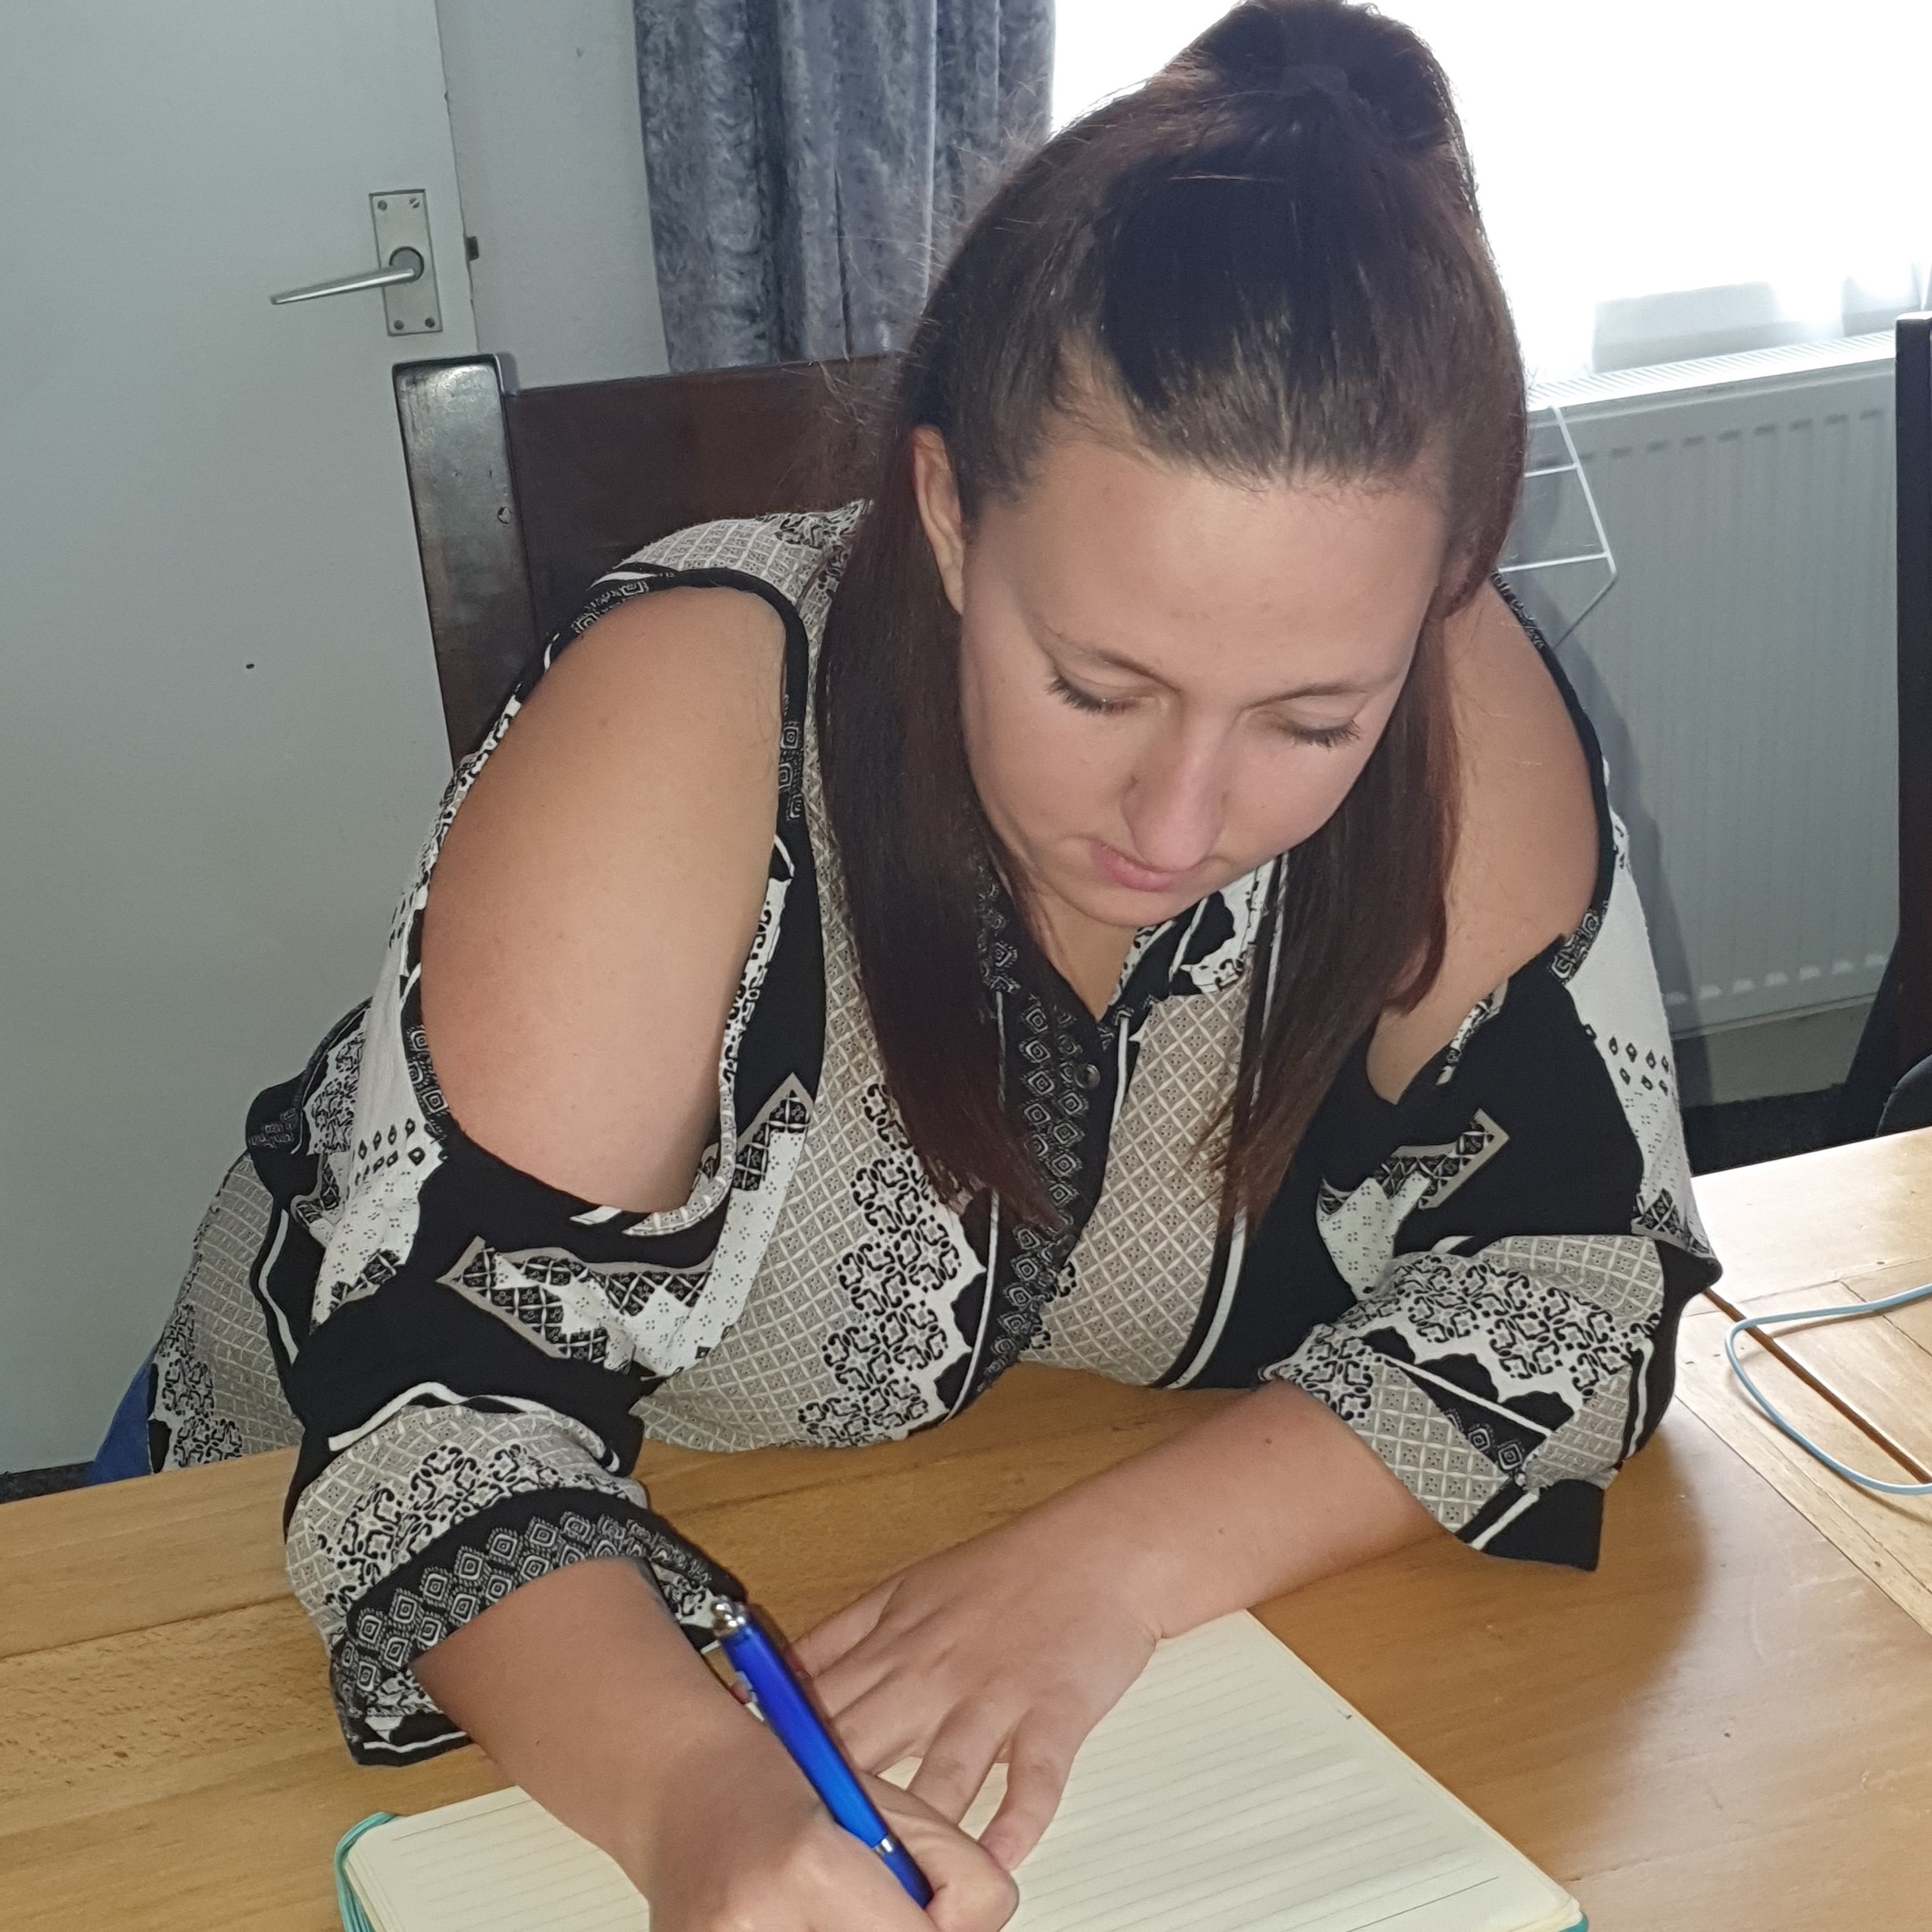 Chloe Southall, who has started a new career in social care thanks to training funded by the West Midlands Combined Authority